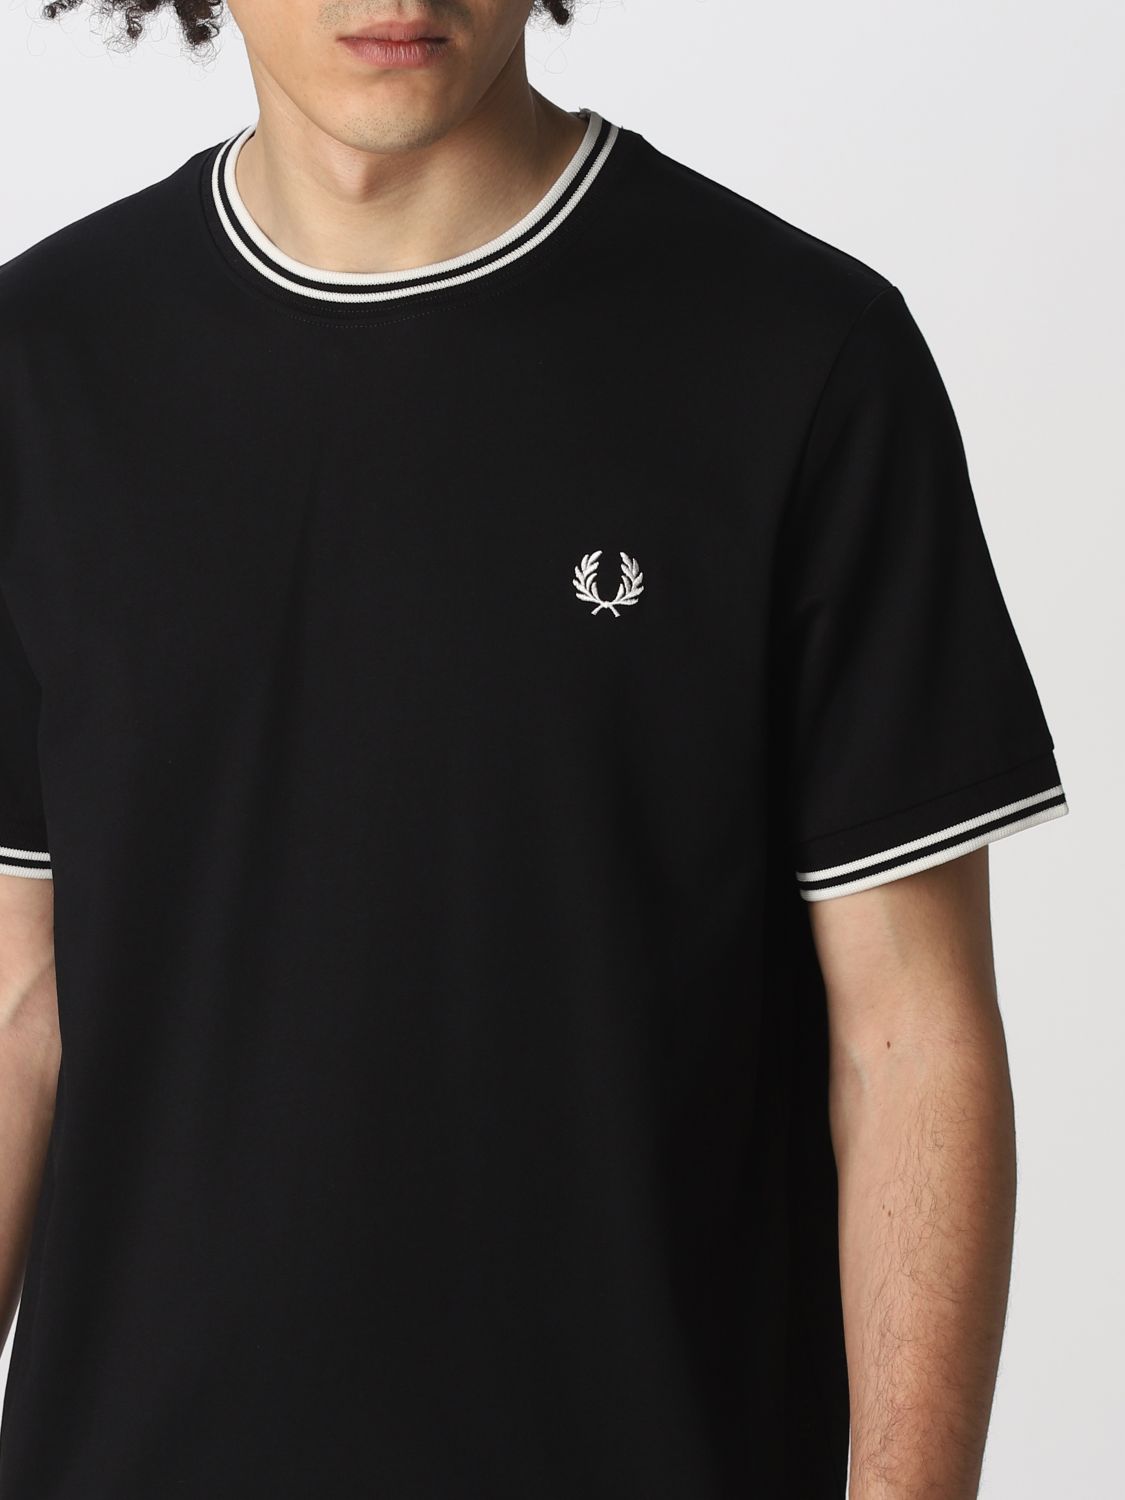 T-Shirt Fred Perry: Fred Perry Herren T-Shirt schwarz 3